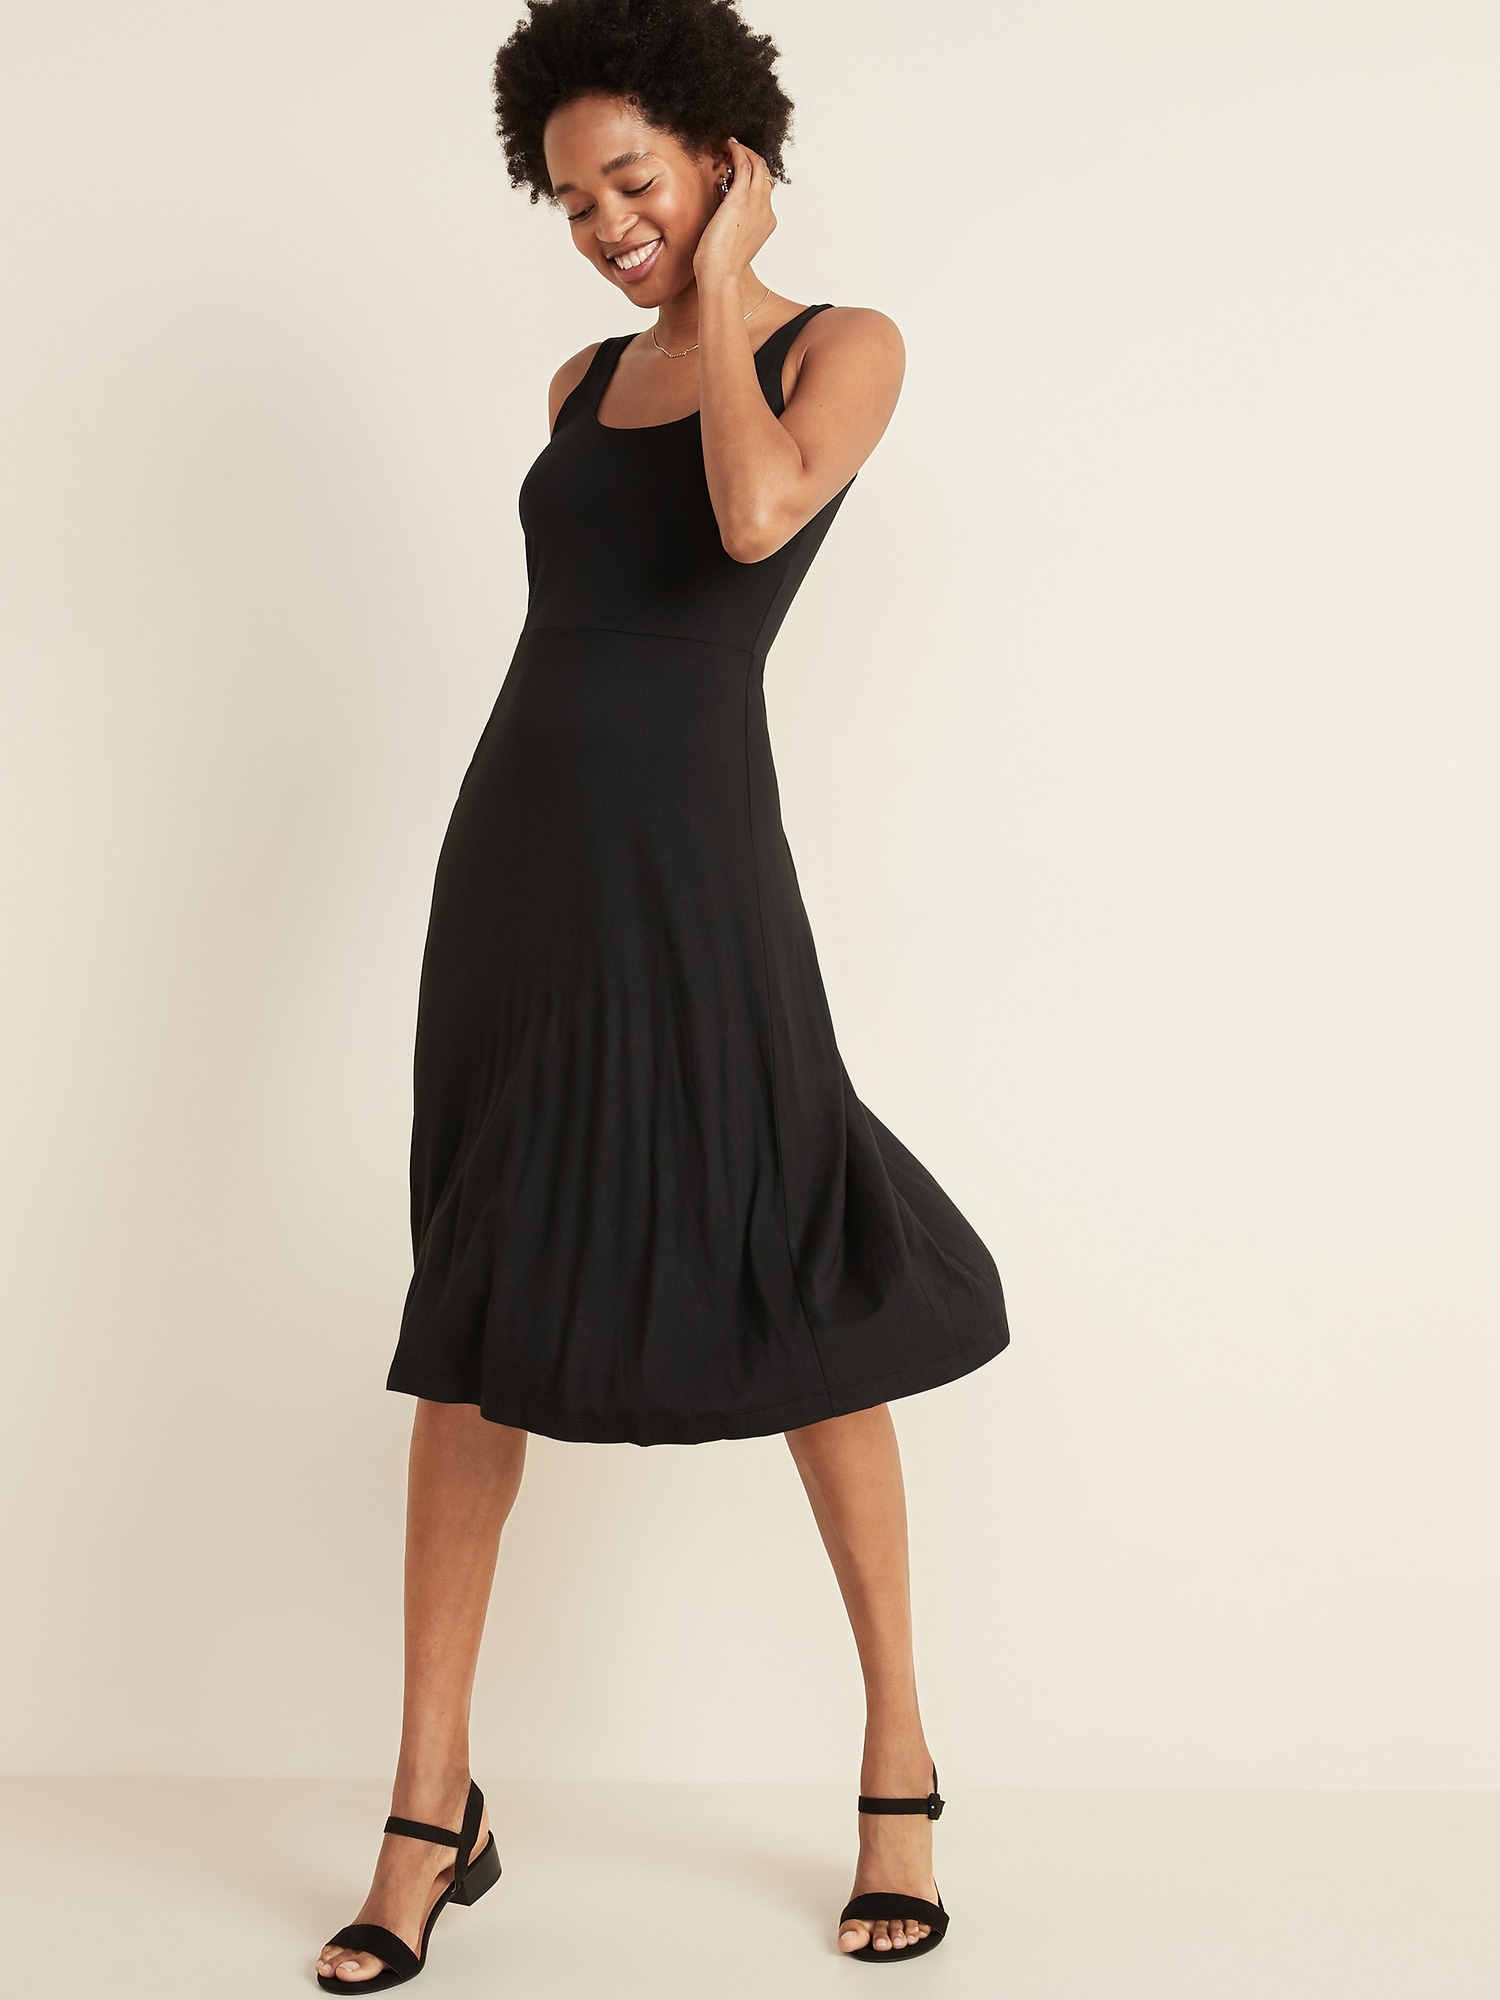 black sleeveless fit and flare dress